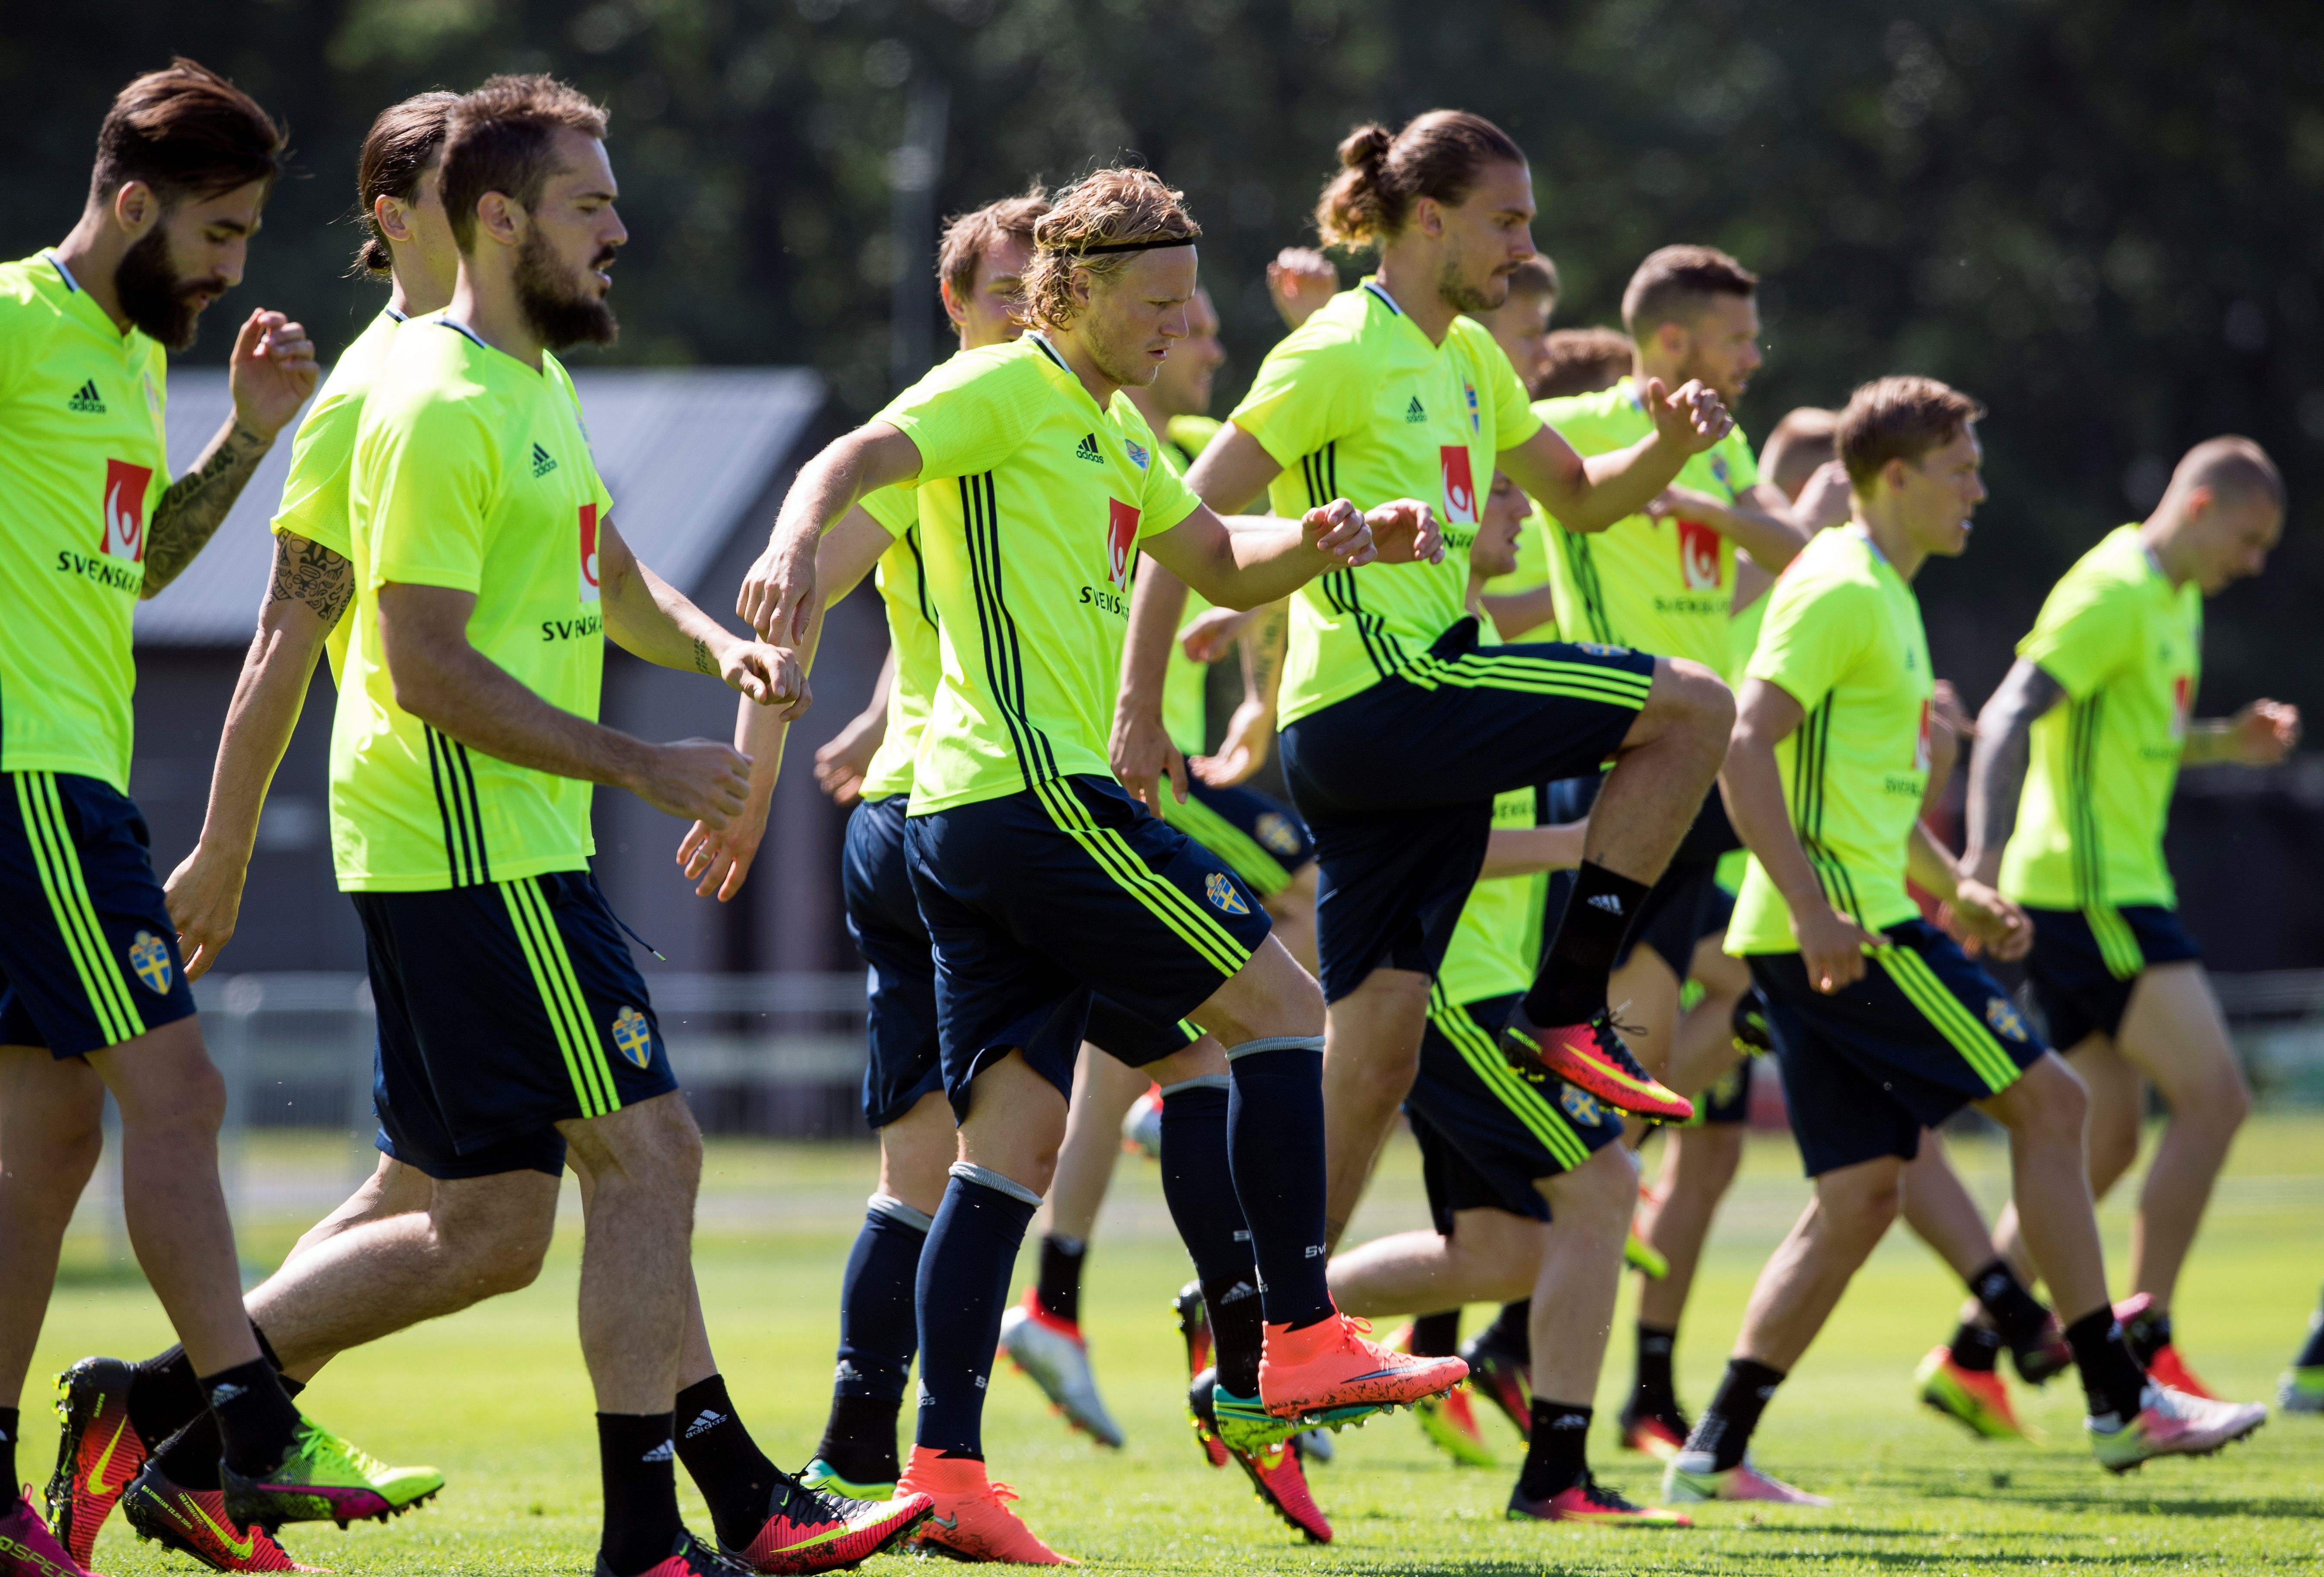 Sweden's national football team players attend a training session in Bastad, Sweden, on June 3, 2016, where the team stays for a training camp as part of preparations for the upcoming Euro 2016 European football championships. / AFP / JONATHAN NACKSTRAND        (Photo credit should read JONATHAN NACKSTRAND/AFP/Getty Images)